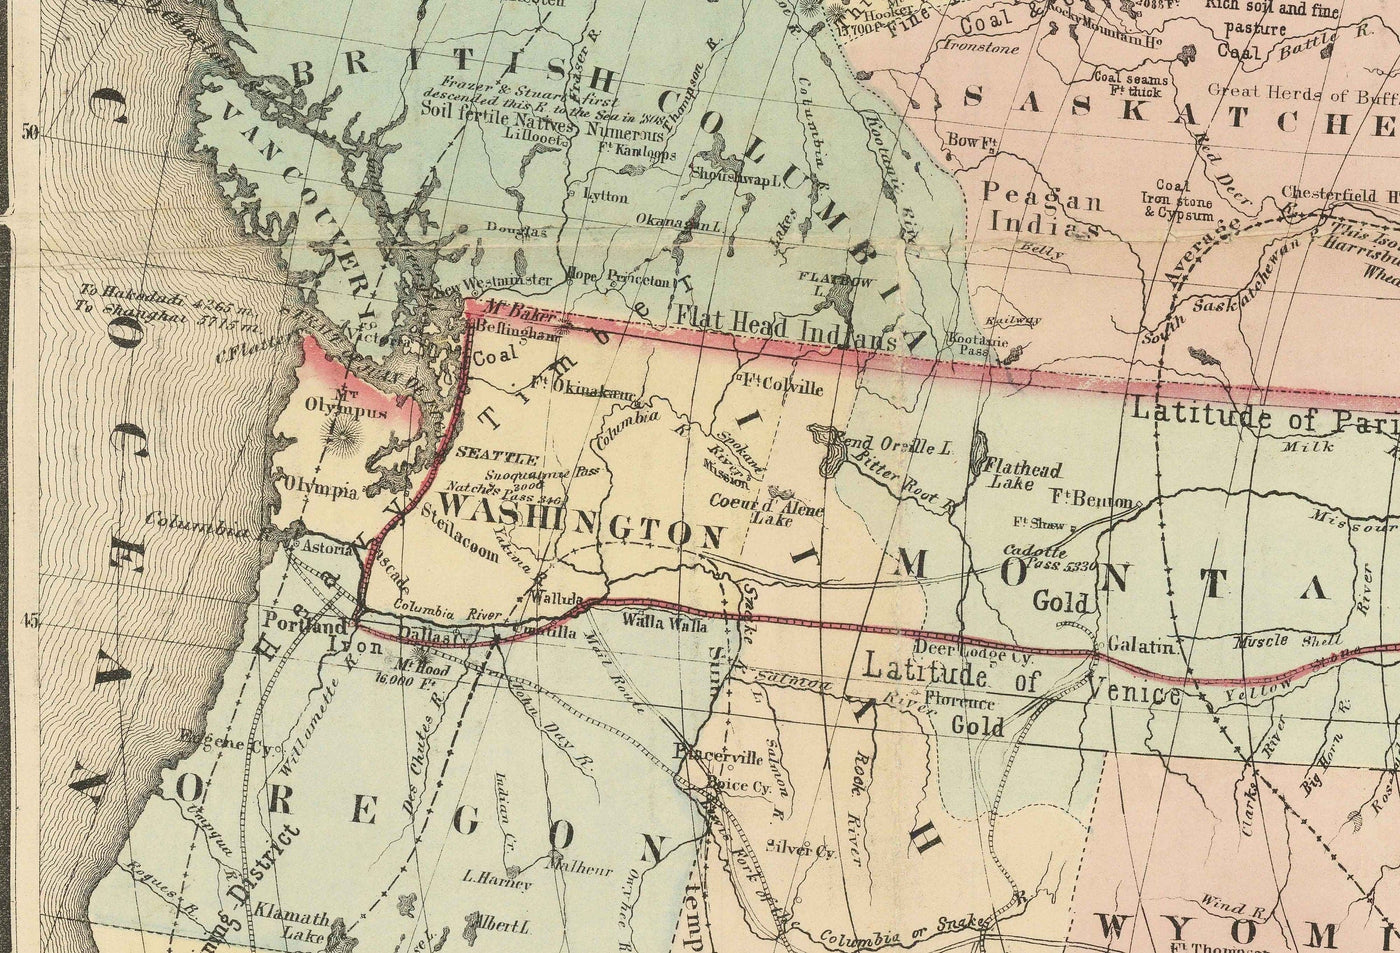 Old Map of the Northern Pacific Railway, 1870 by Traubel - Railroads in Canada & USA - Great Lakes, States